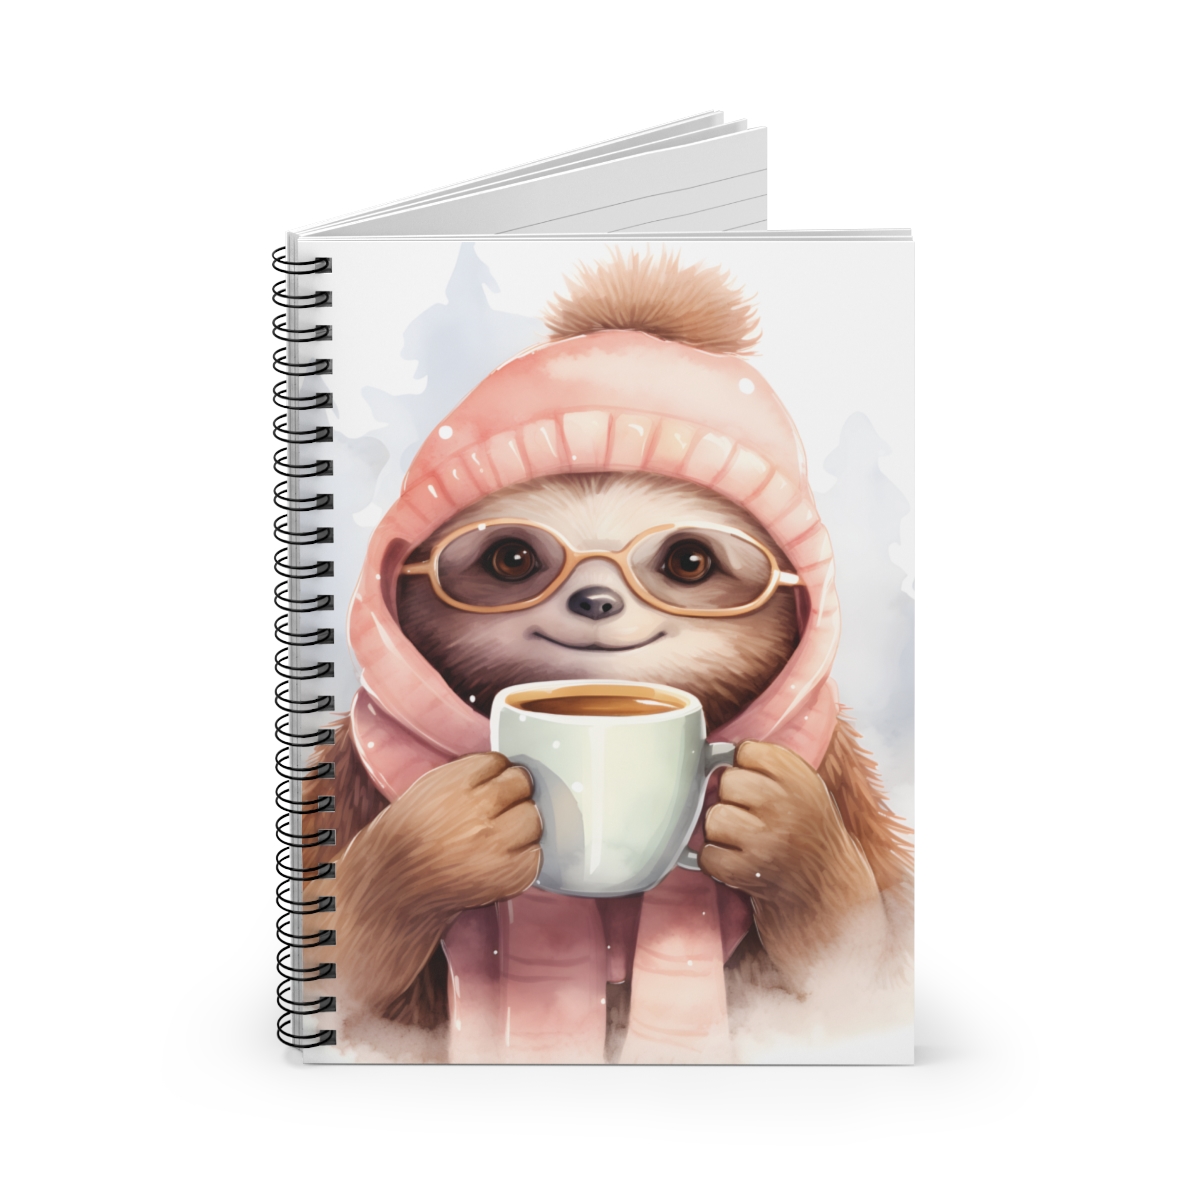 spiral sloth notebook open showing lined ruled paper